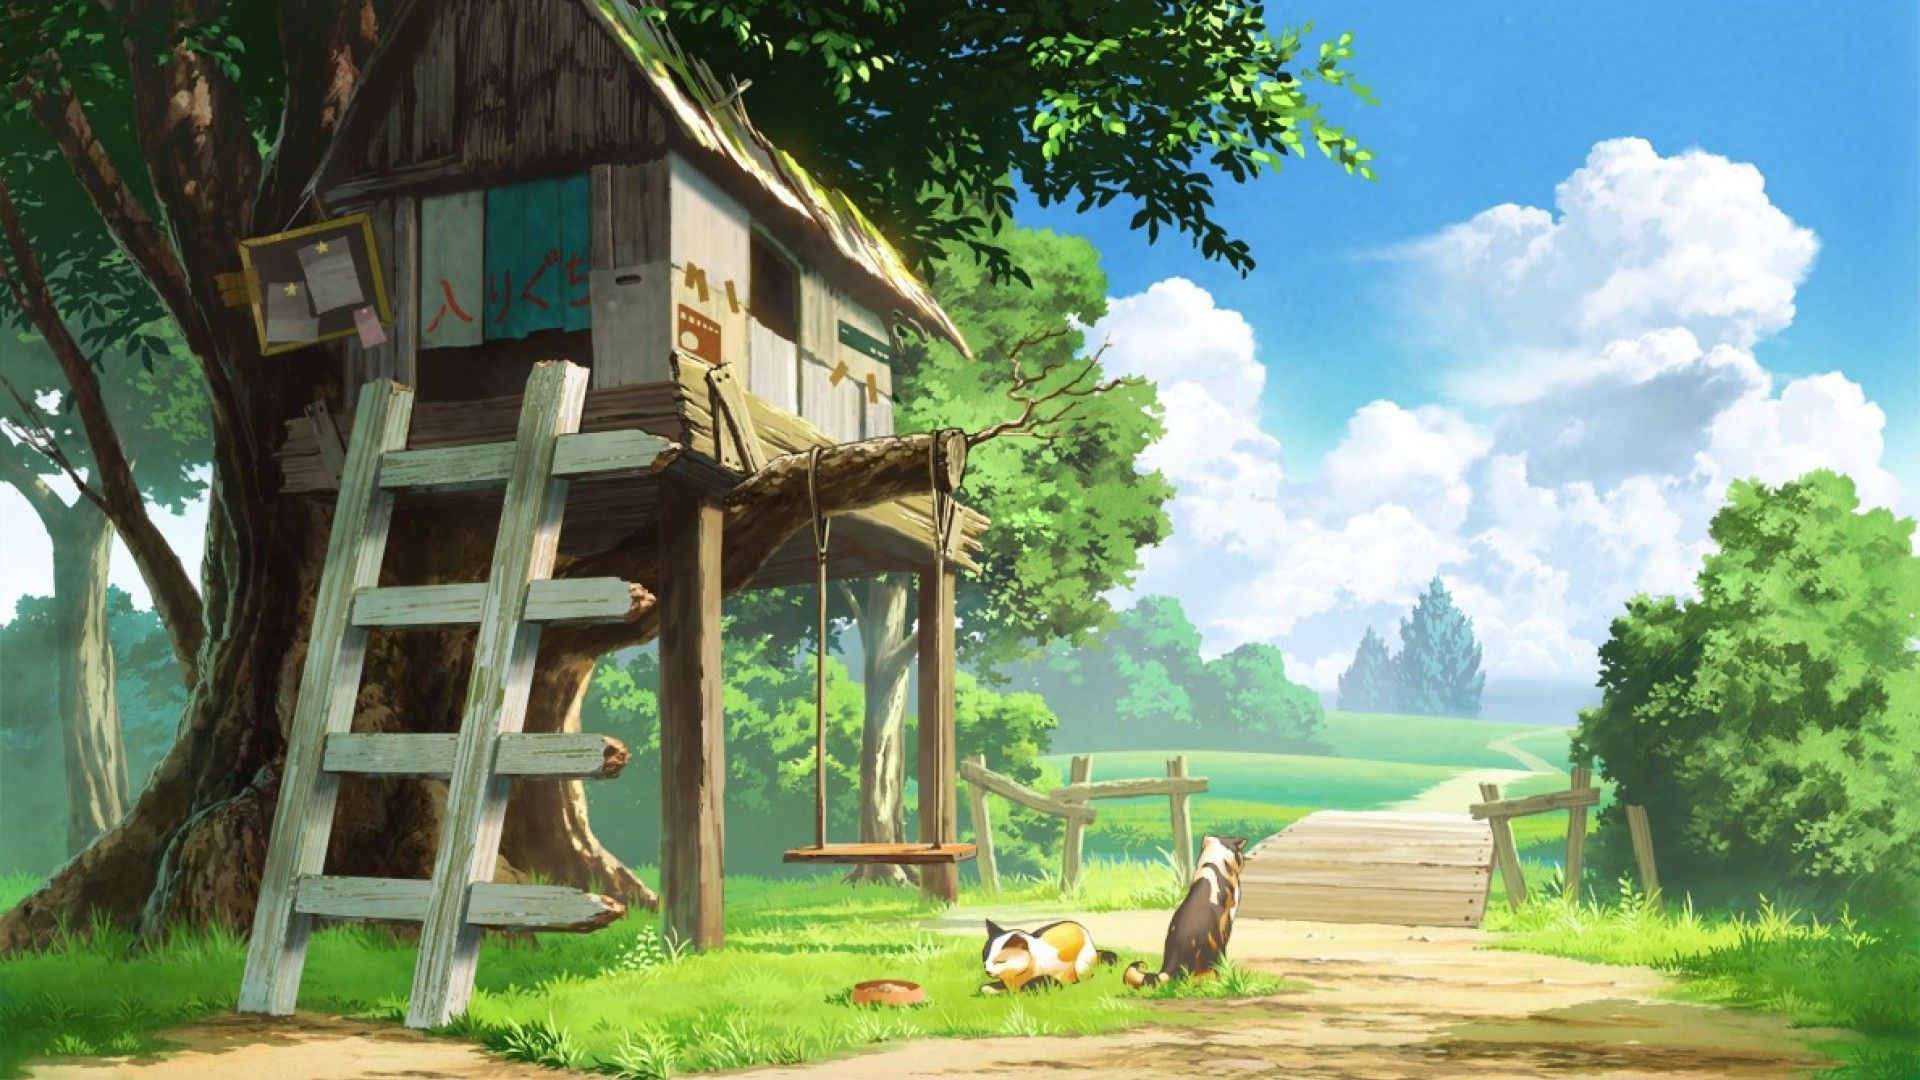 Different Places to Visit. Tree house wallpaper, Anime scenery wallpaper, Cat tree house